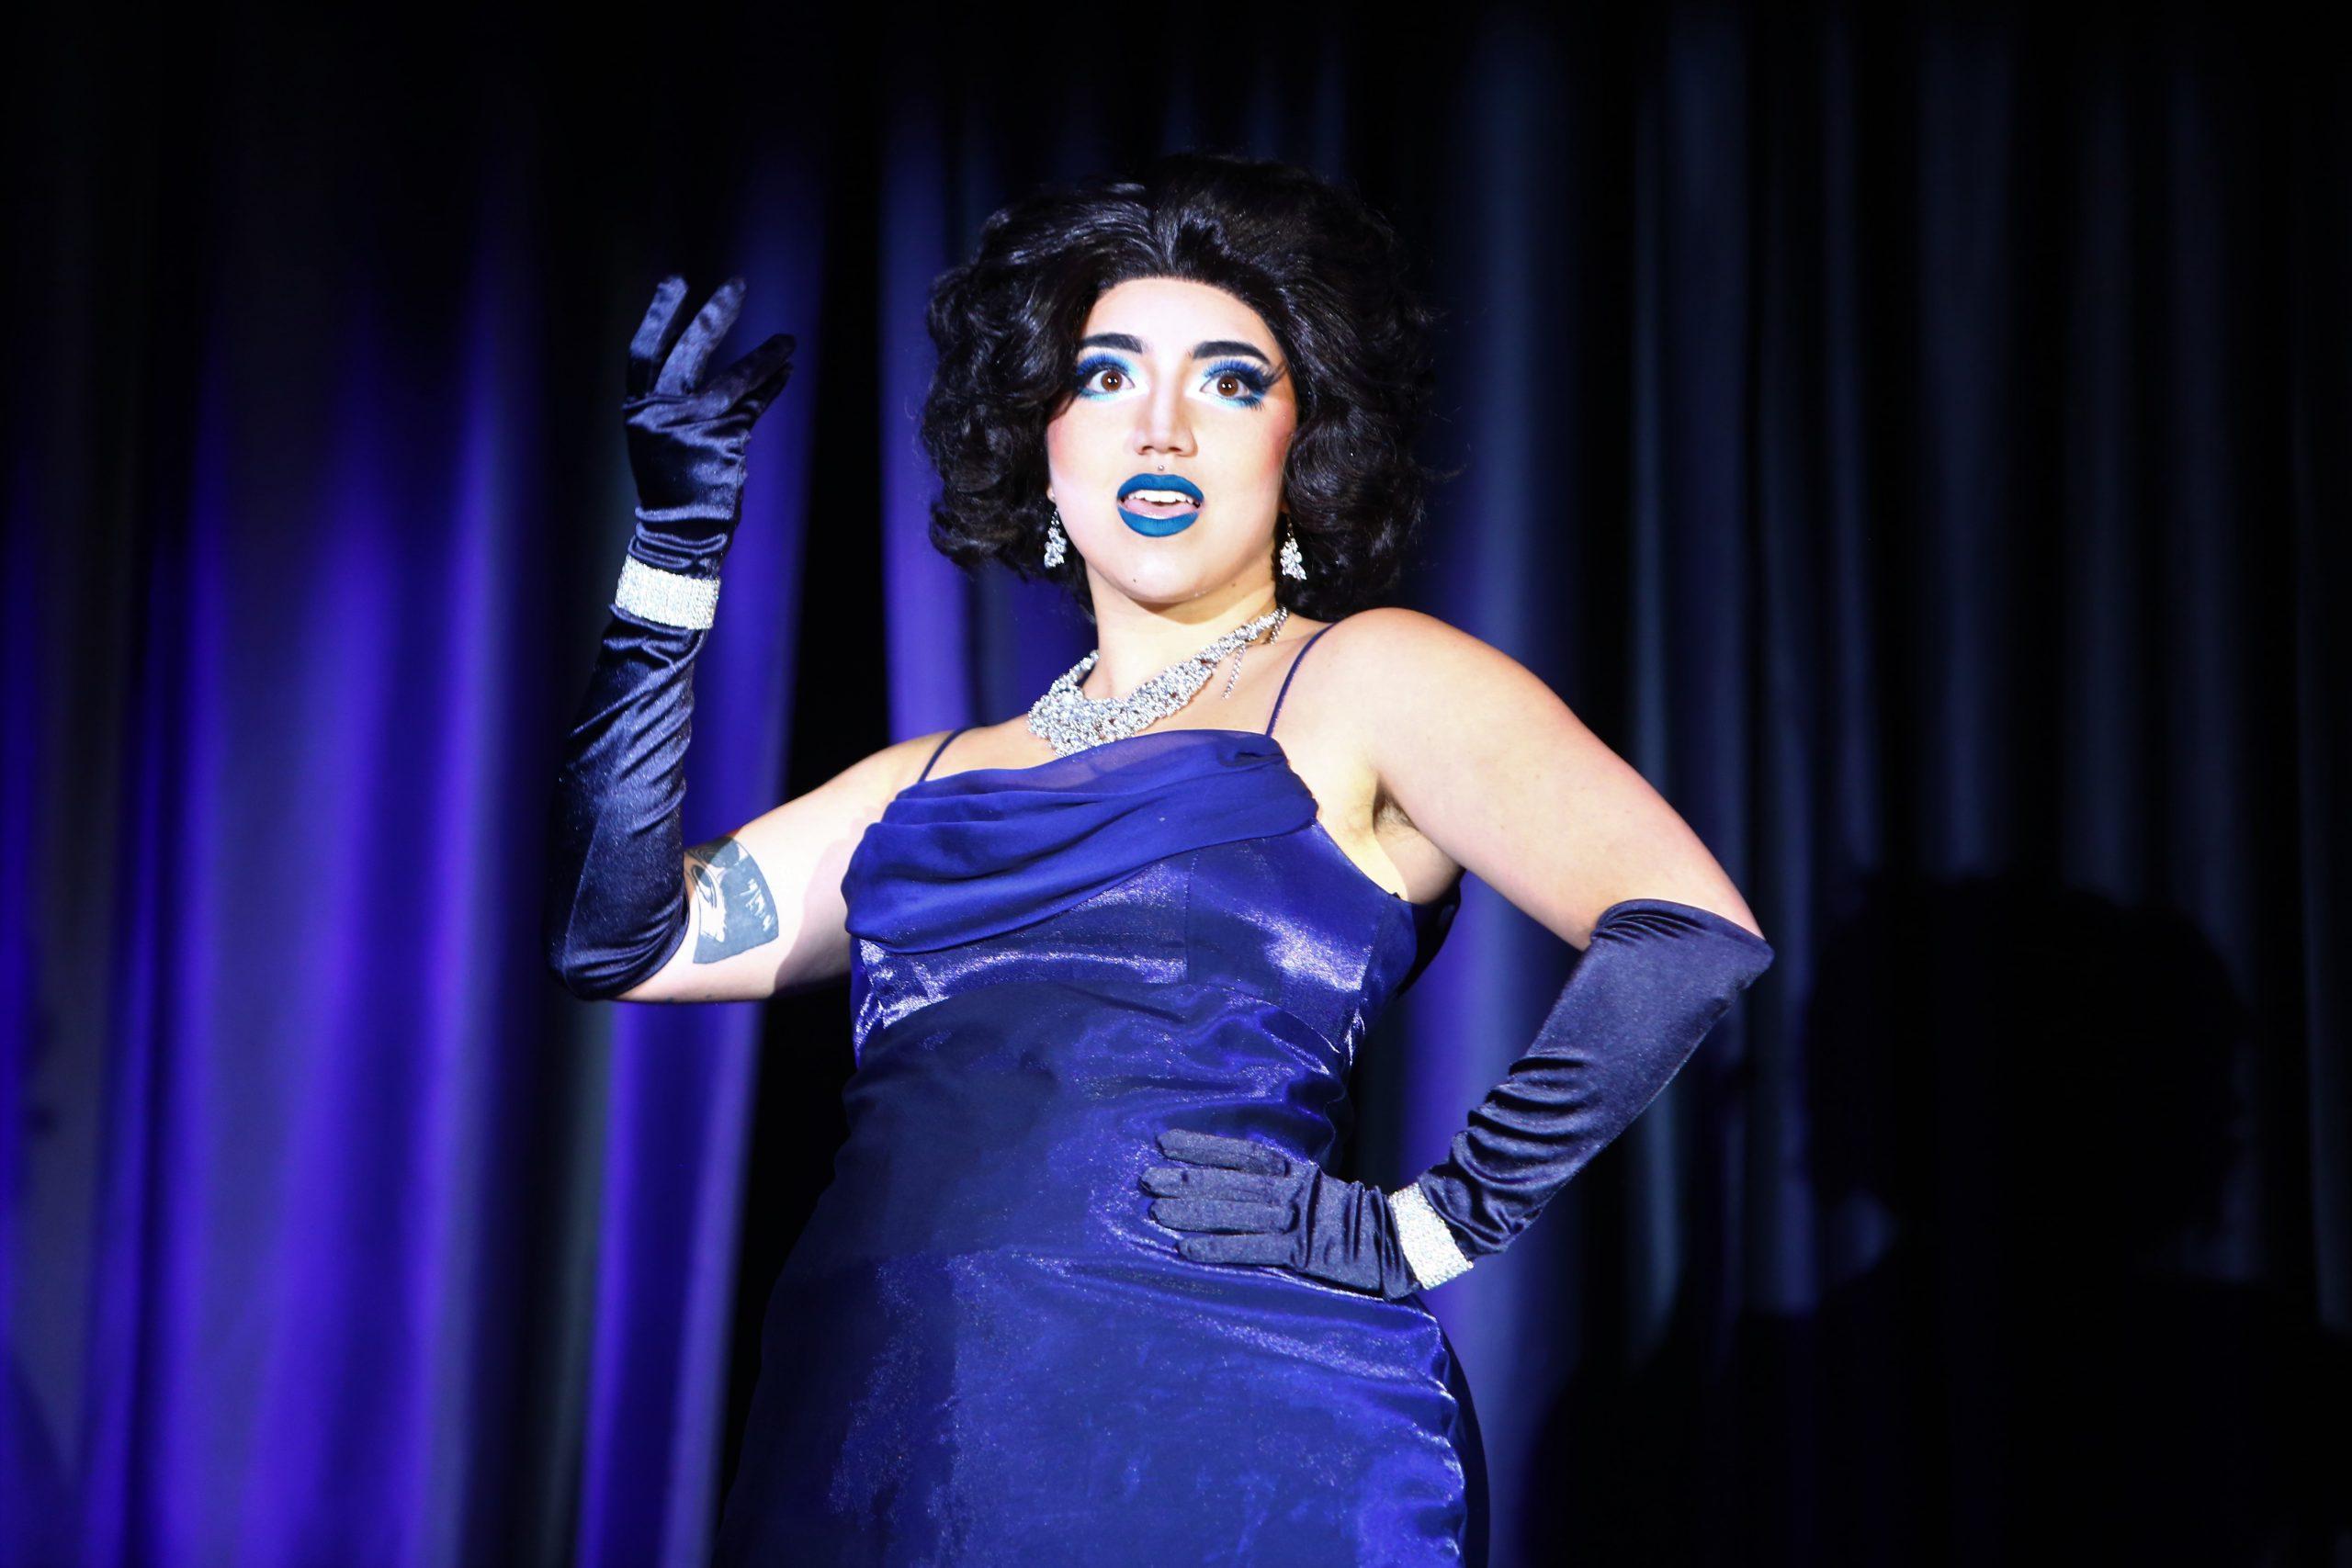 CSUs+drag+show+celebrates+20+years+with+an+epic+throwback